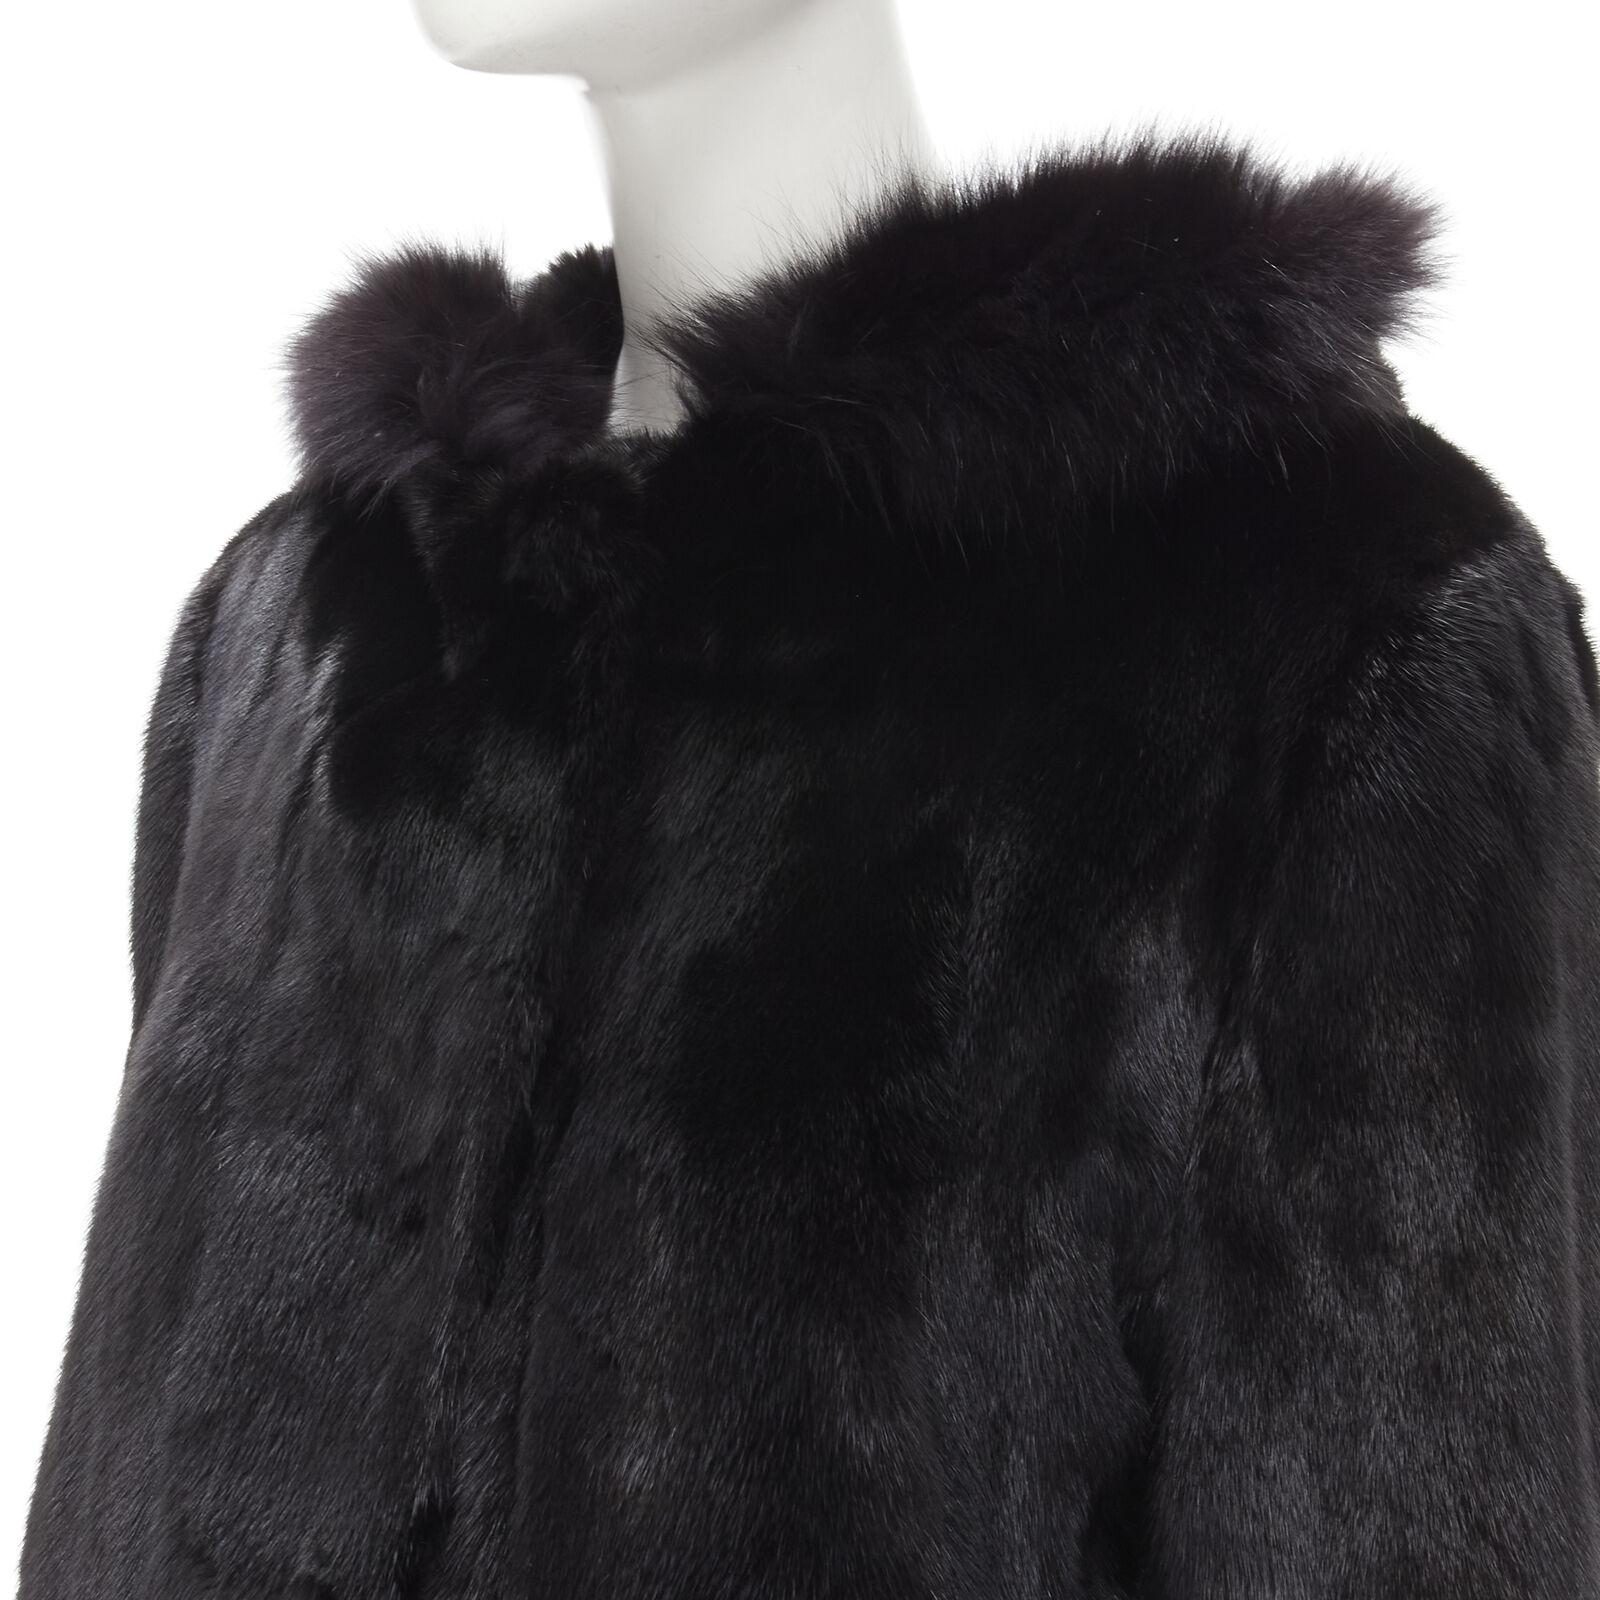 ISLA black fur long sleeve snap button hooded jacket IT42
Reference: KNLM/A00064
Brand: Isla
Material: Fur
Color: Black
Pattern: Solid
Closure: Snap Buttons
Lining: Fabric

CONDITION:
Condition: Excellent, this item was pre-owned and is in excellent